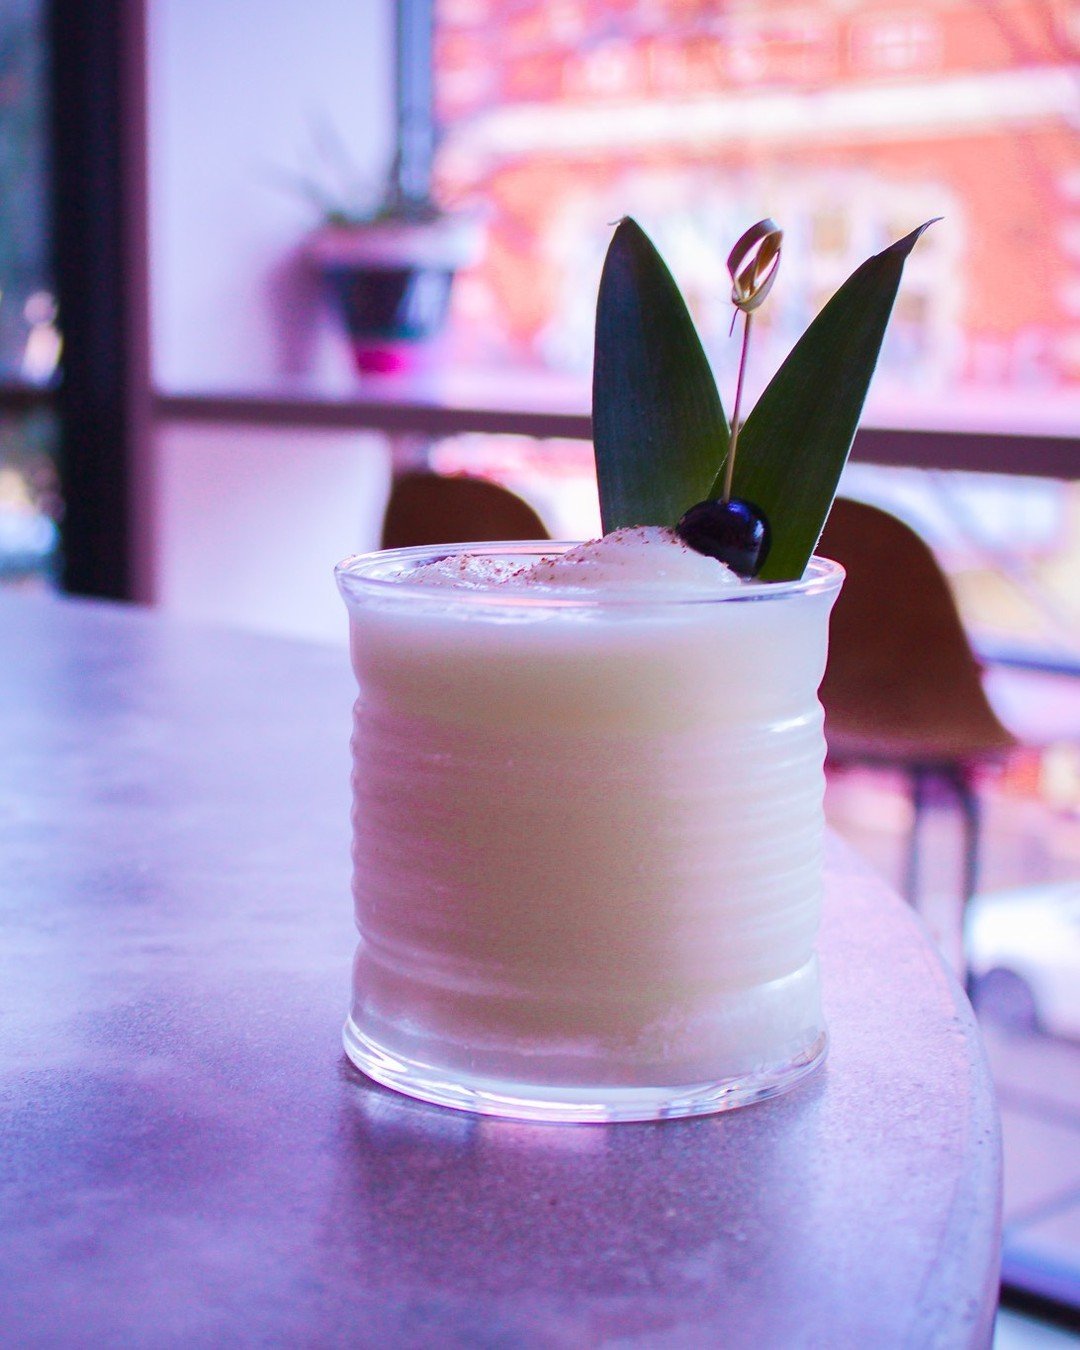 🥥🍍 Do you like Pi&ntilde;a Coladas or getting caught in the rain?⠀
⠀
Today is a perfect day to do both. ⠀
⠀
Head up our stairs if you want just the first one. We open at 4 PM.⠀
⠀
#plainspoke #plainspokecocktails #midwestmade #wisconsincocktailbar #